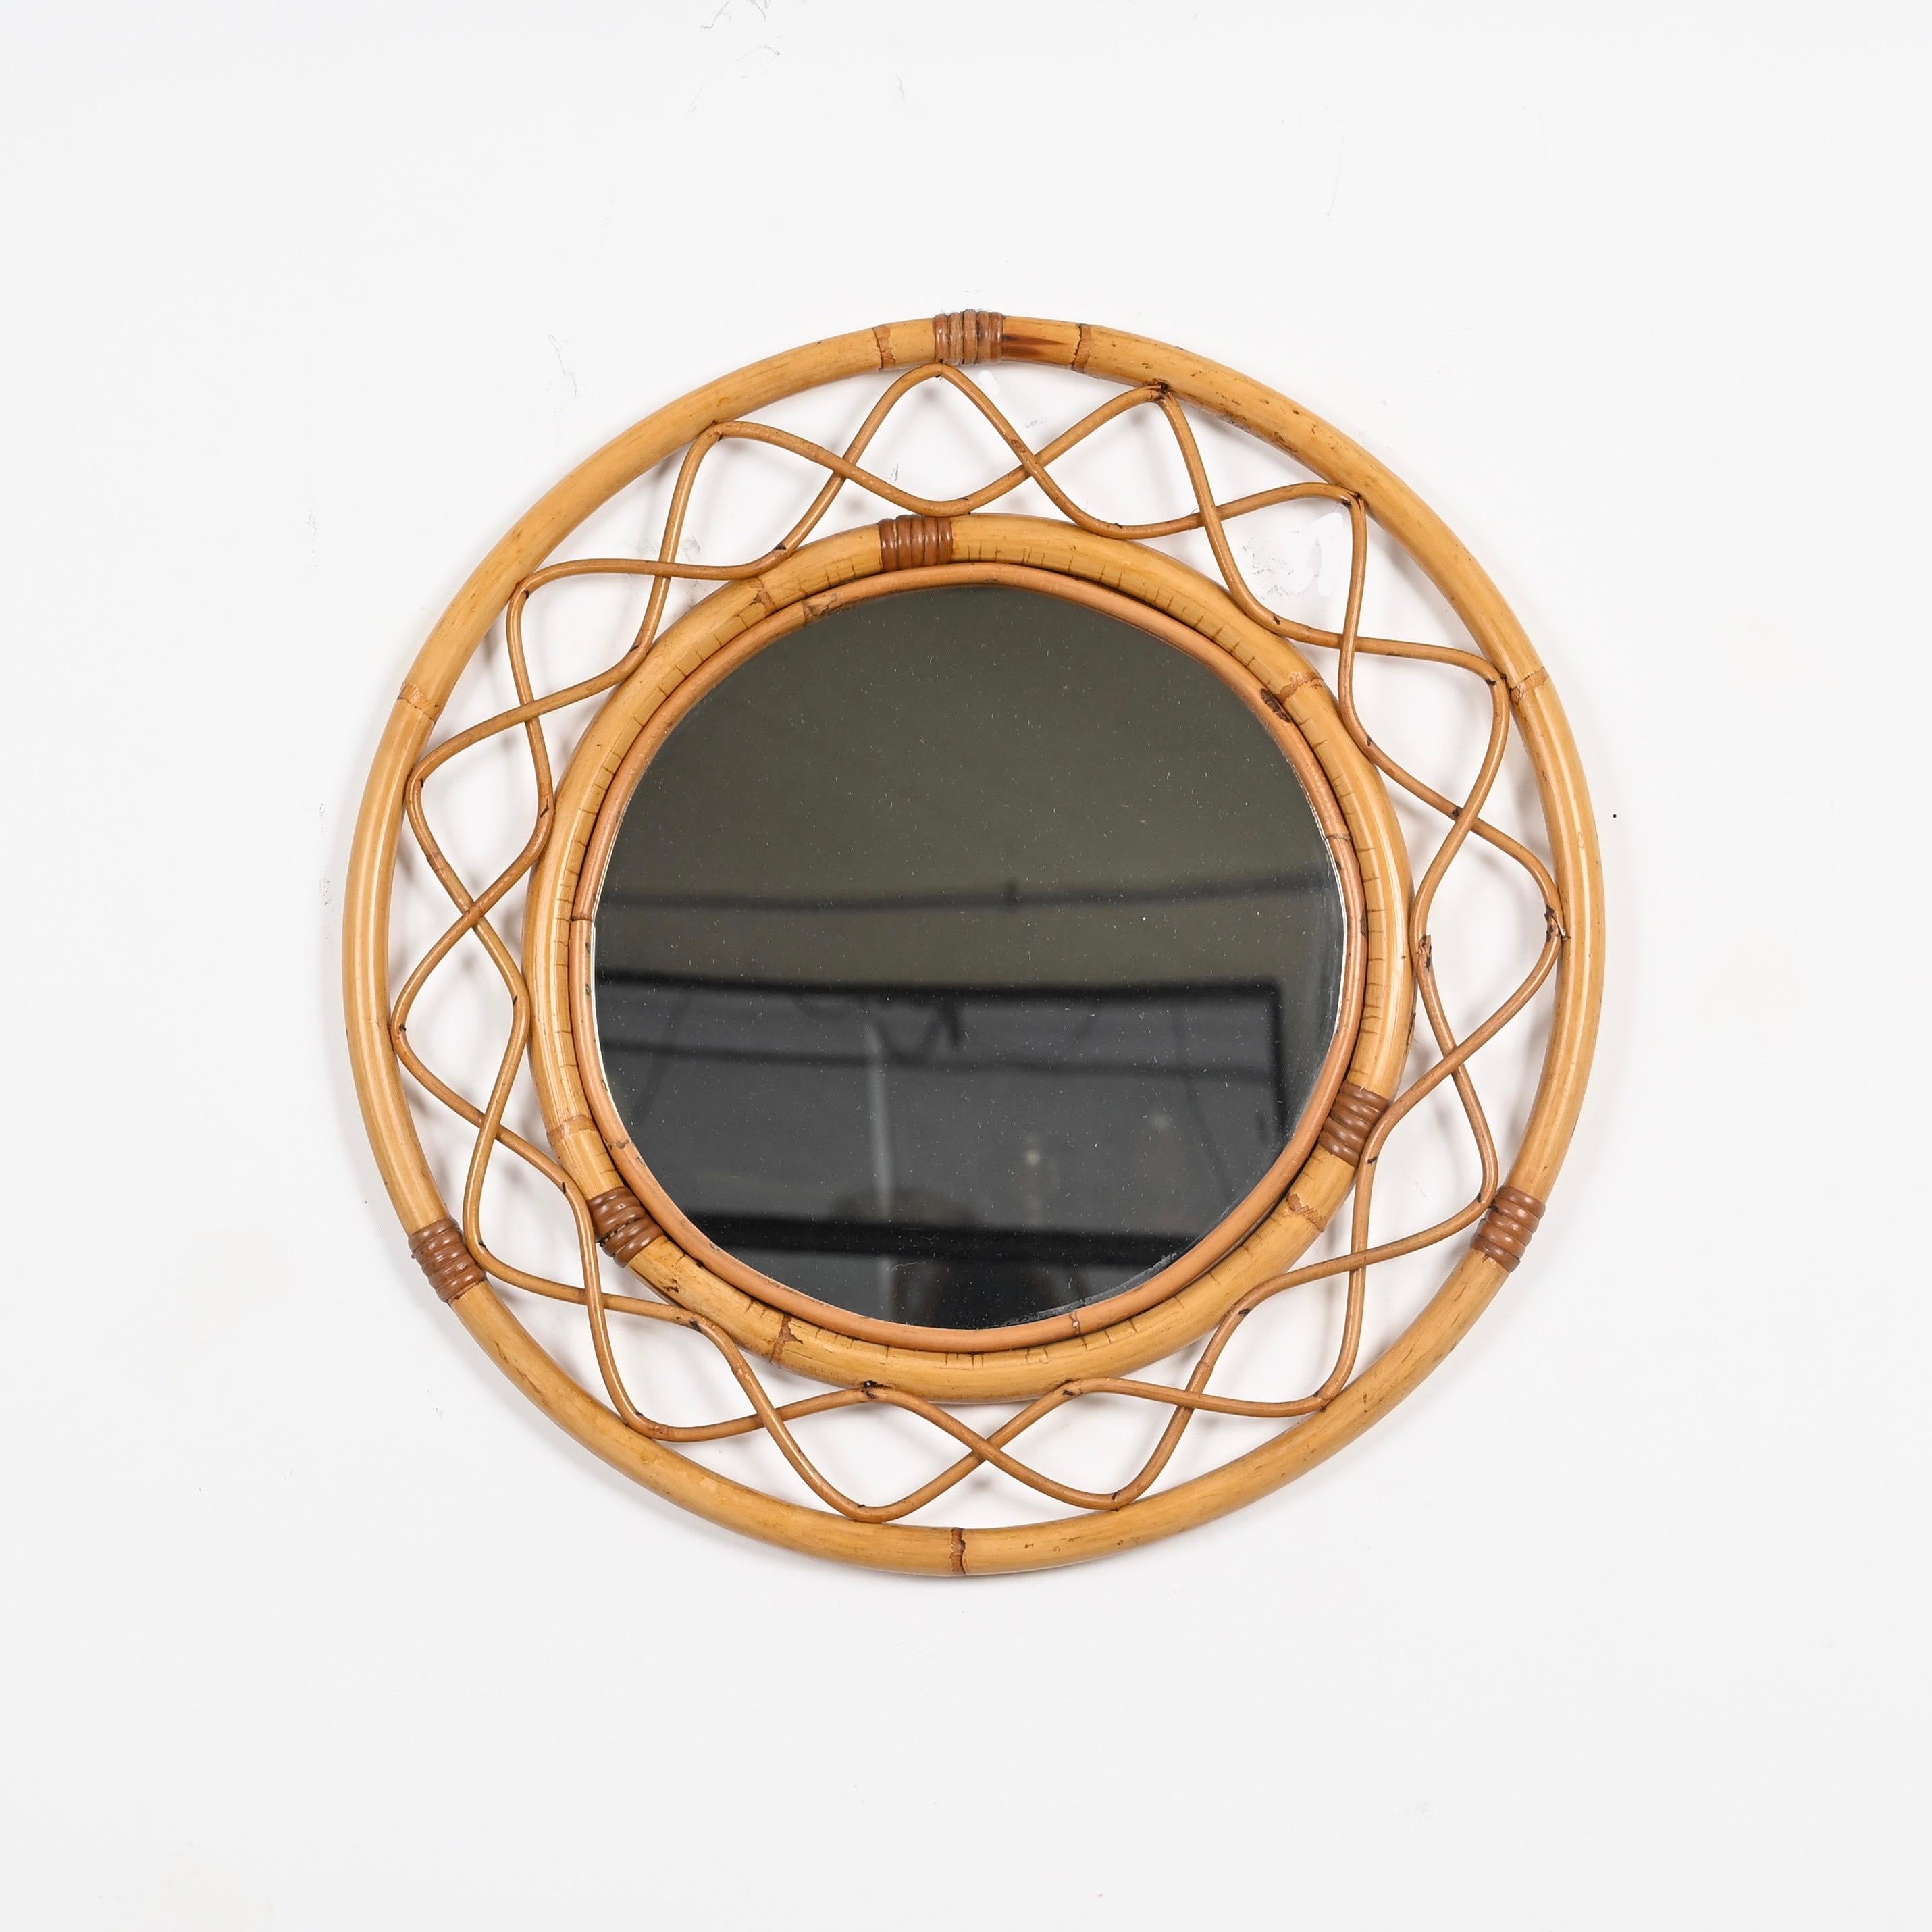 Midcentury Round Italian Mirror, Curved Bamboo, Rattan and Wicker Frame, 1960s For Sale 1